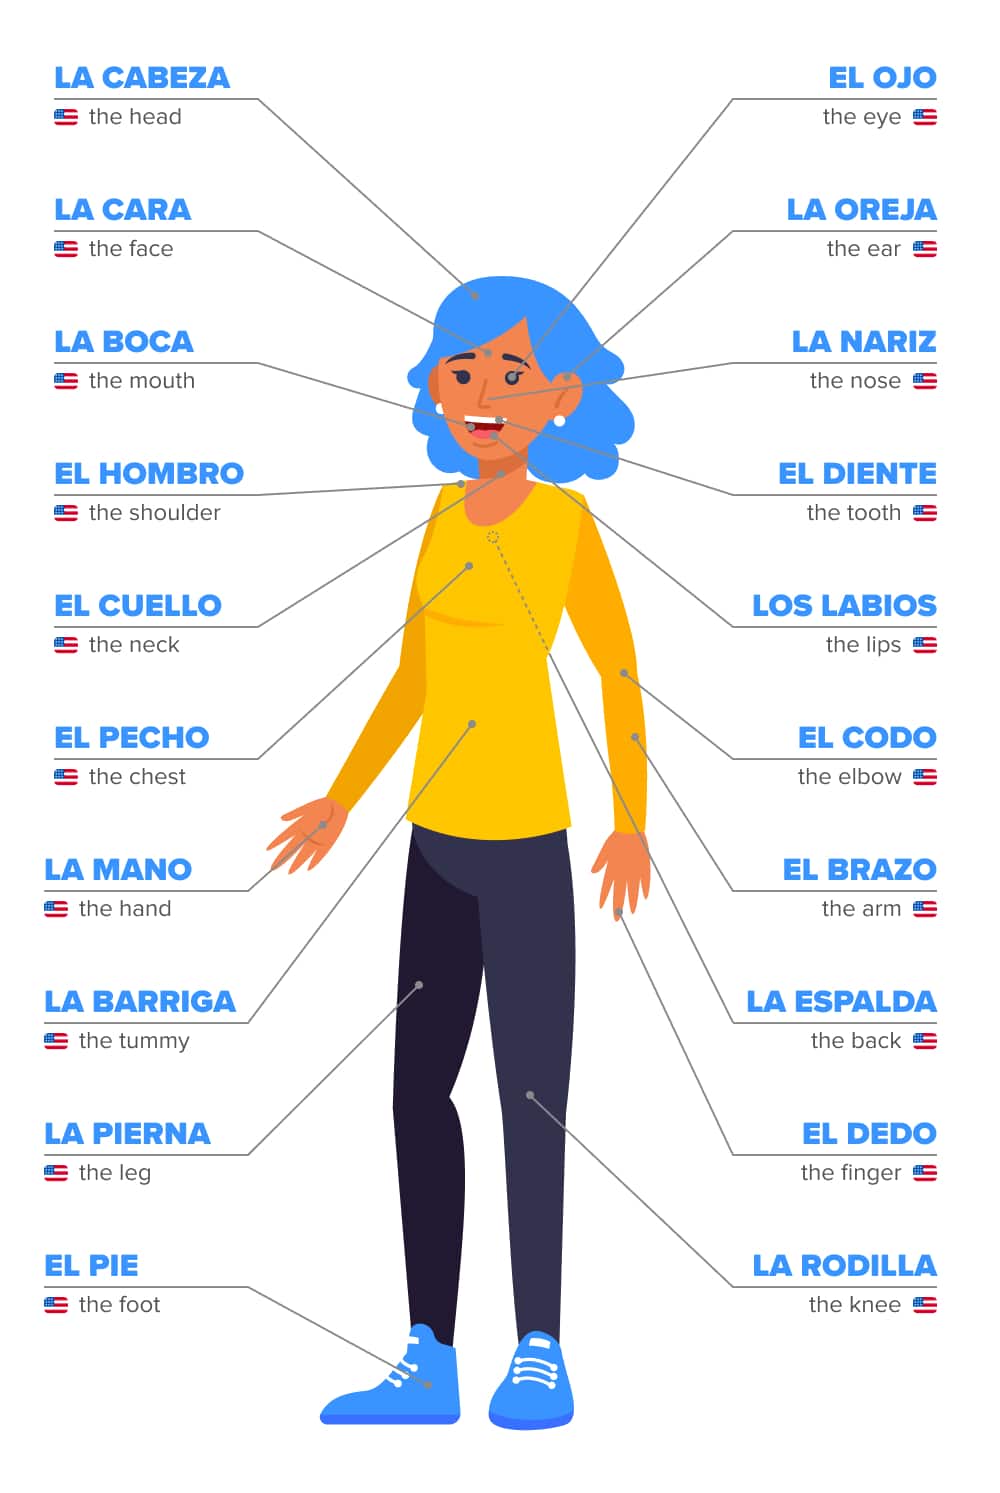 How to Say Hello in Spanish: 76 Classic and Creative Ways to Greet